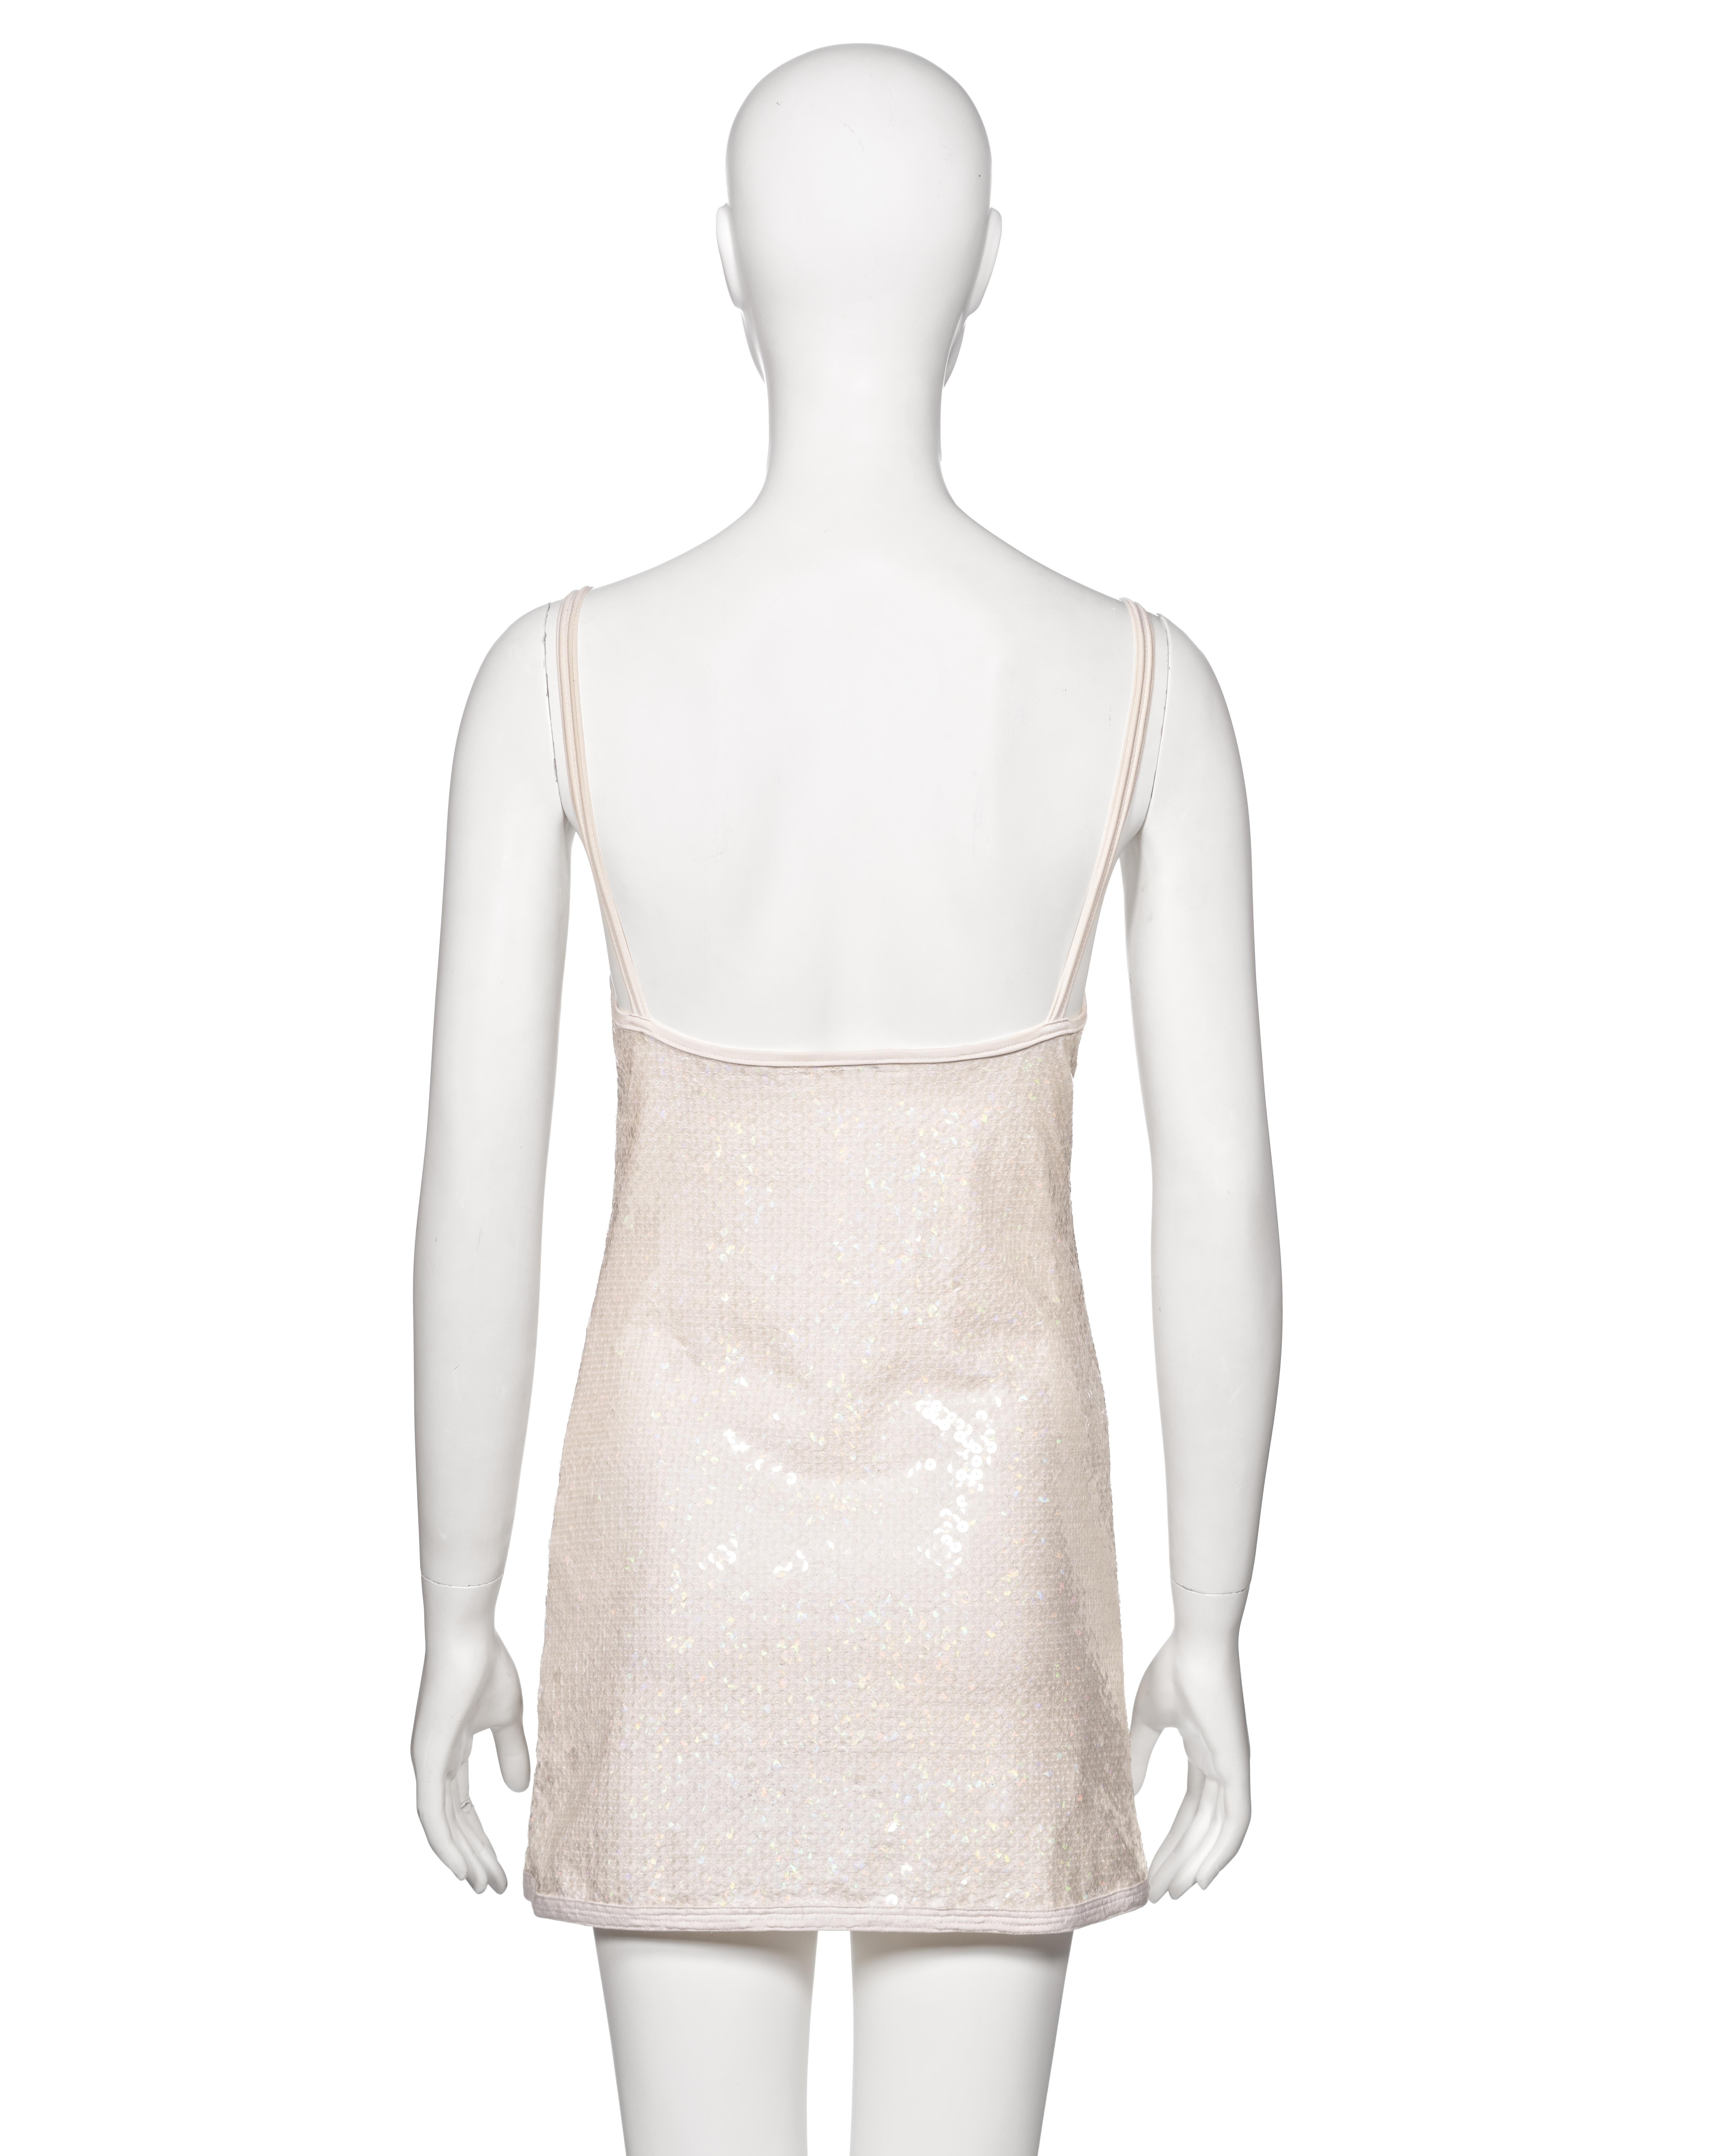 Chanel by Karl Lagerfeld White Iridescent Sequin Mini Dress, ss 2005 4